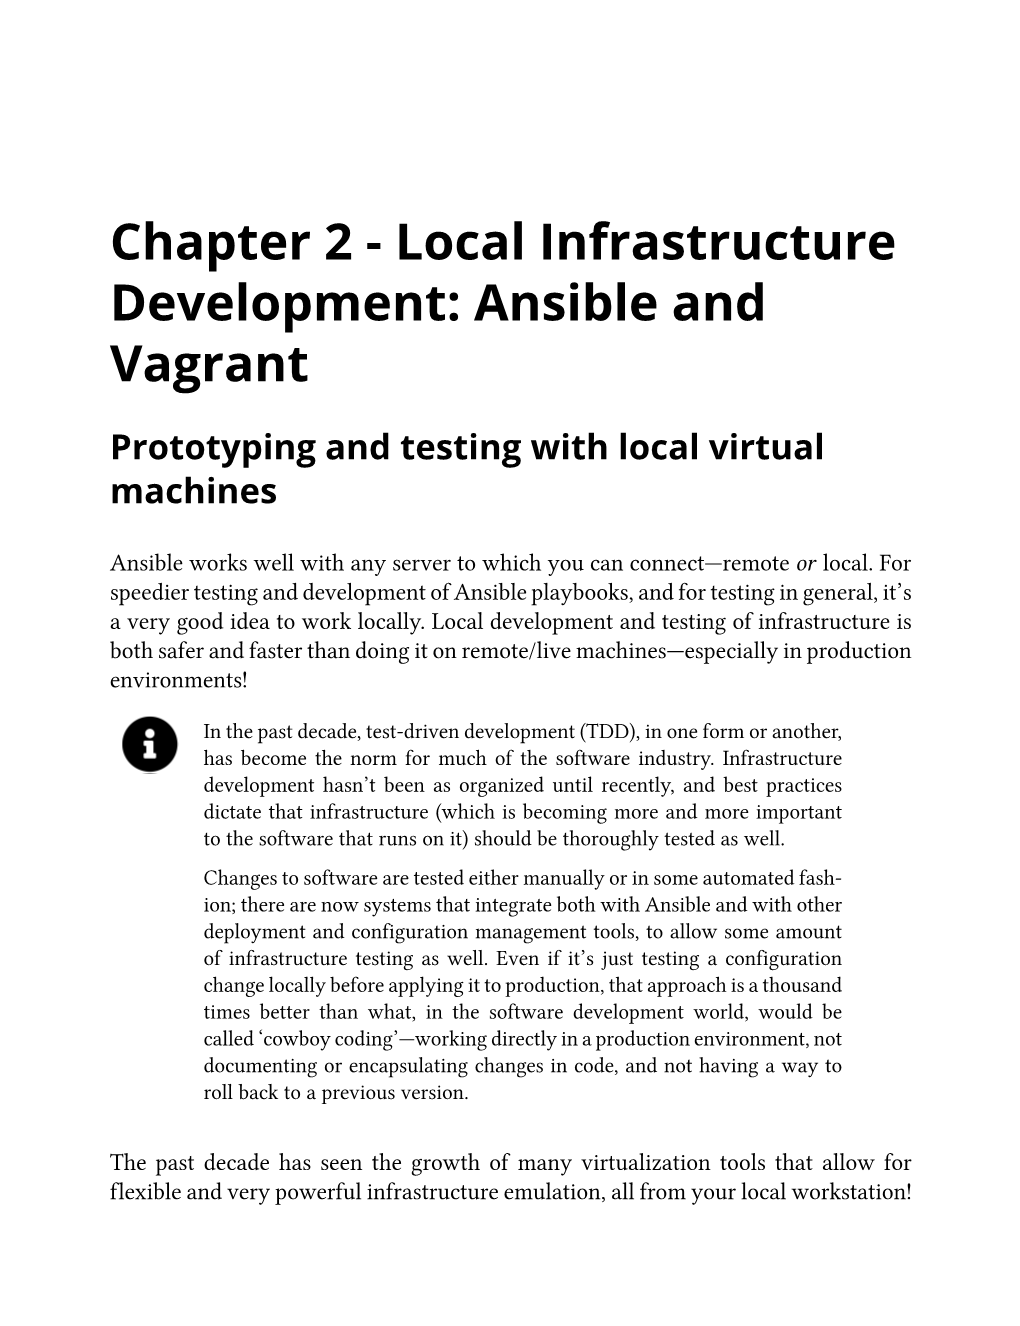 Chapter 2 - Local Infrastructure Development: Ansible and Vagrant